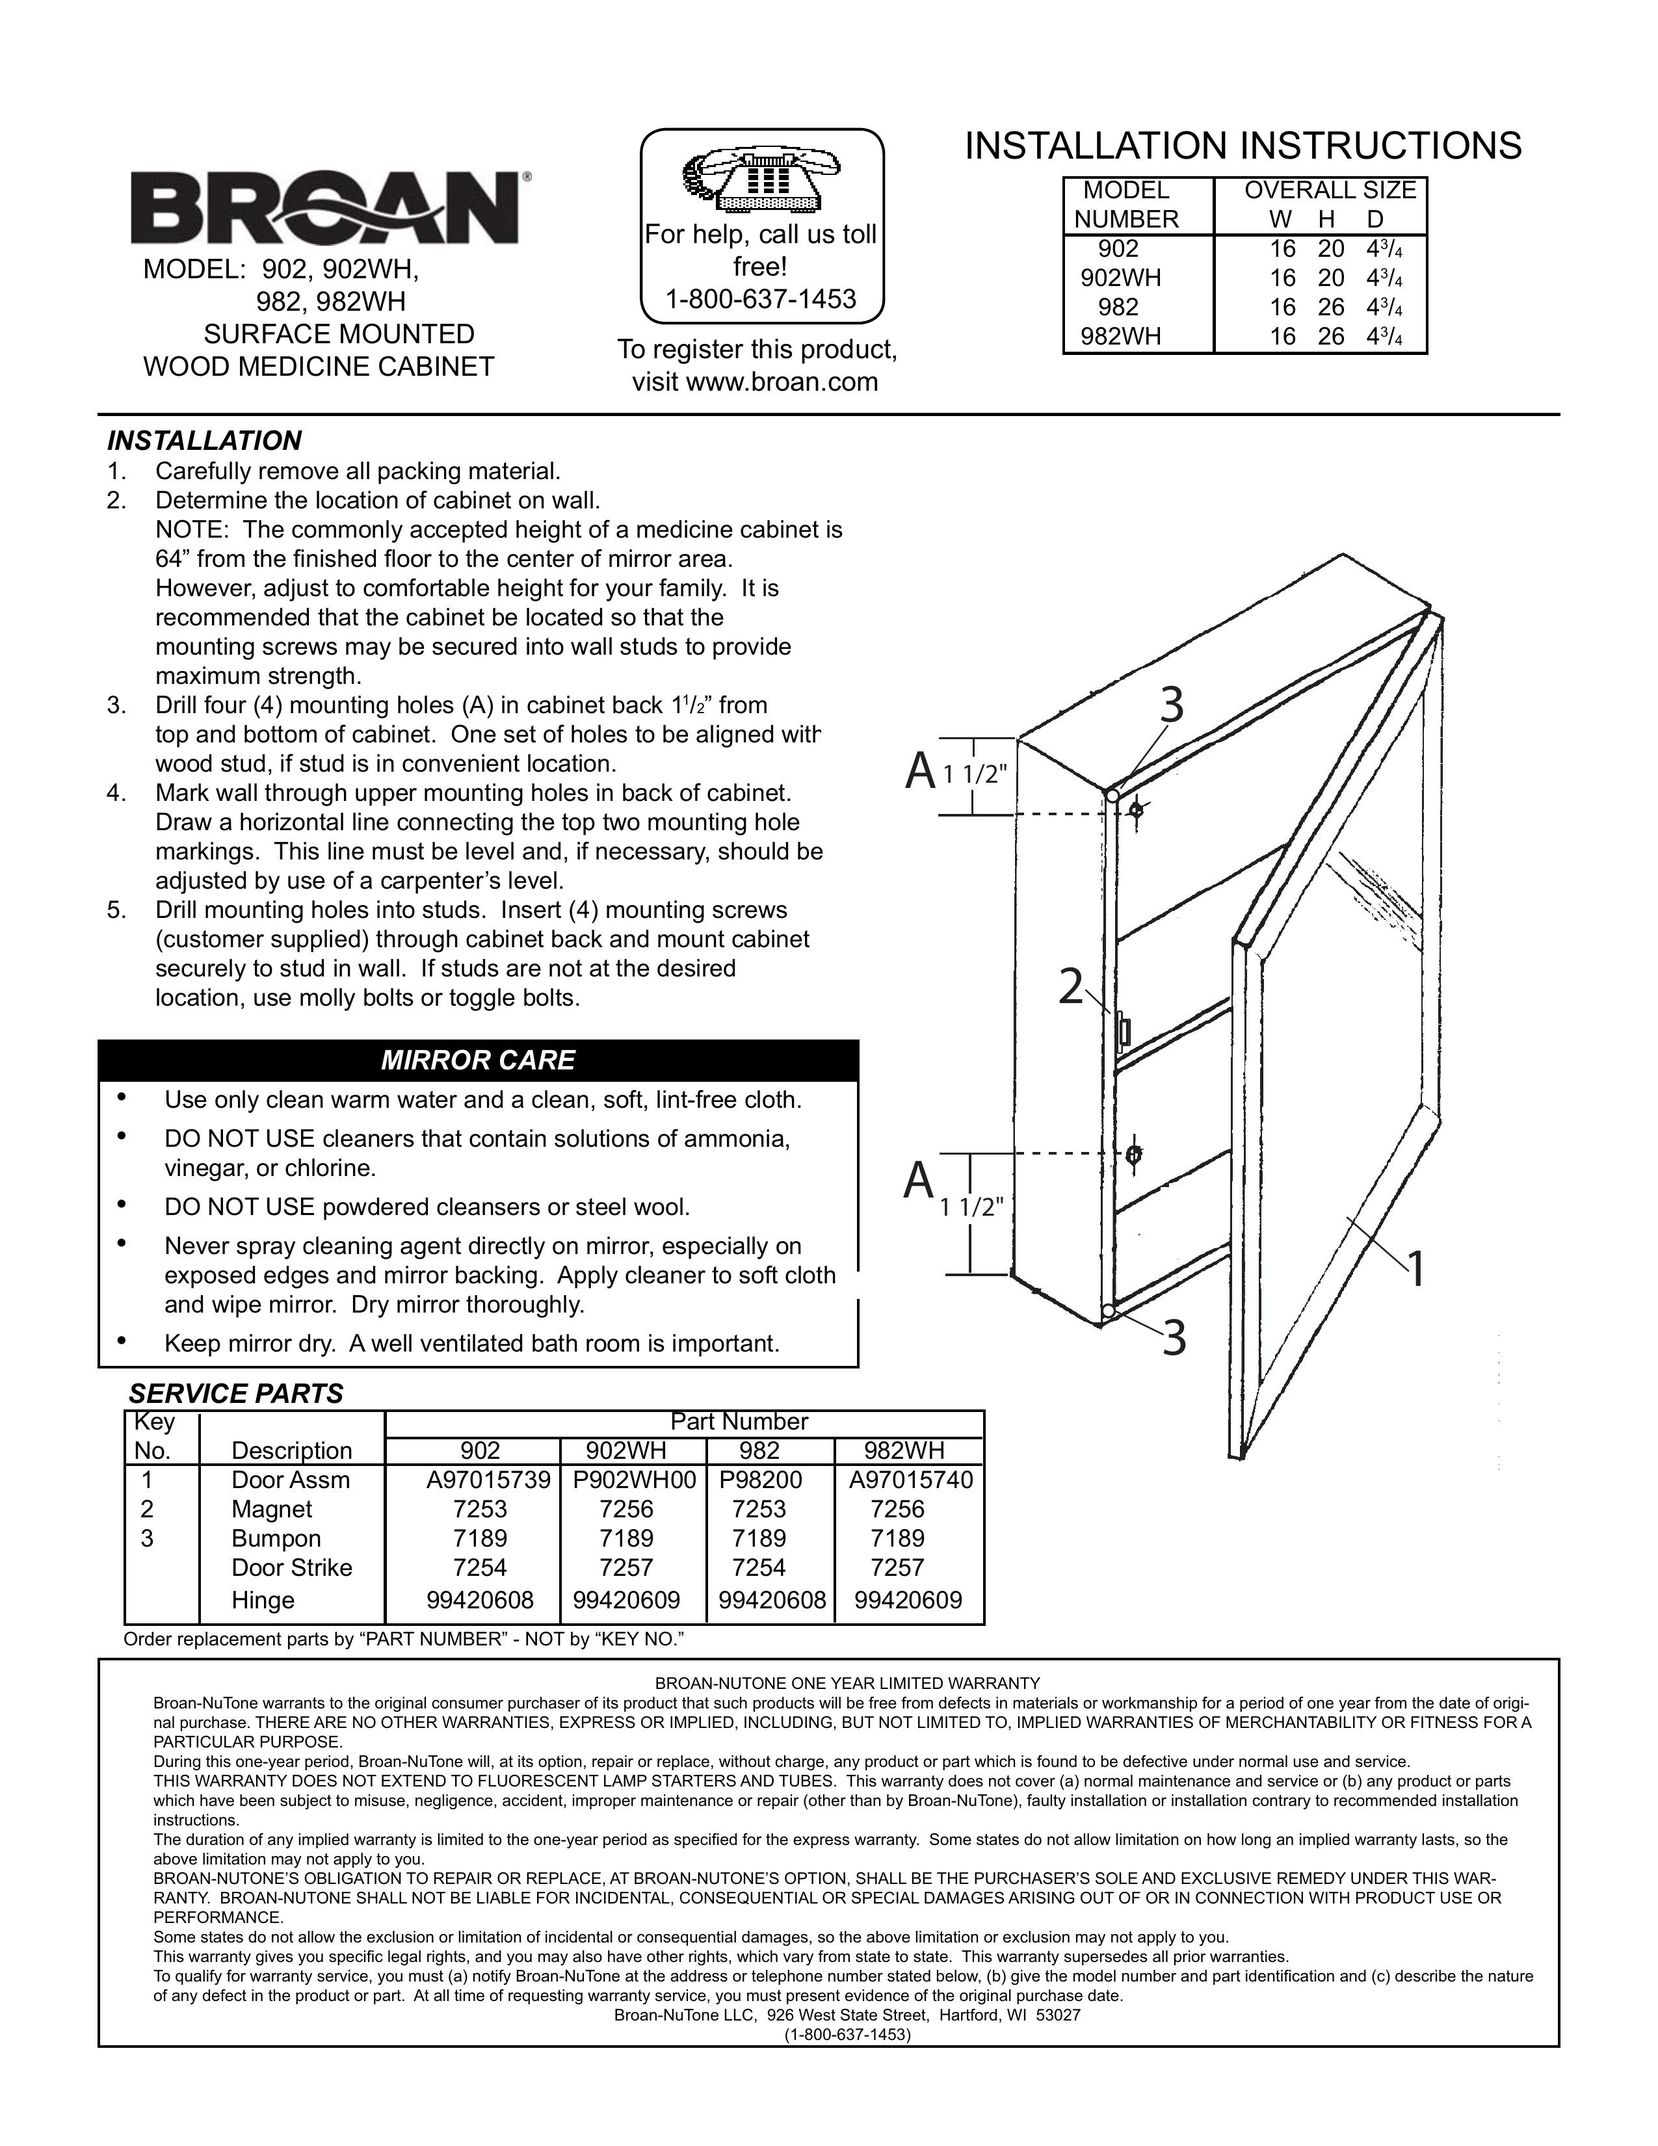 Broan 982WH Kitchen Entertainment Center User Manual